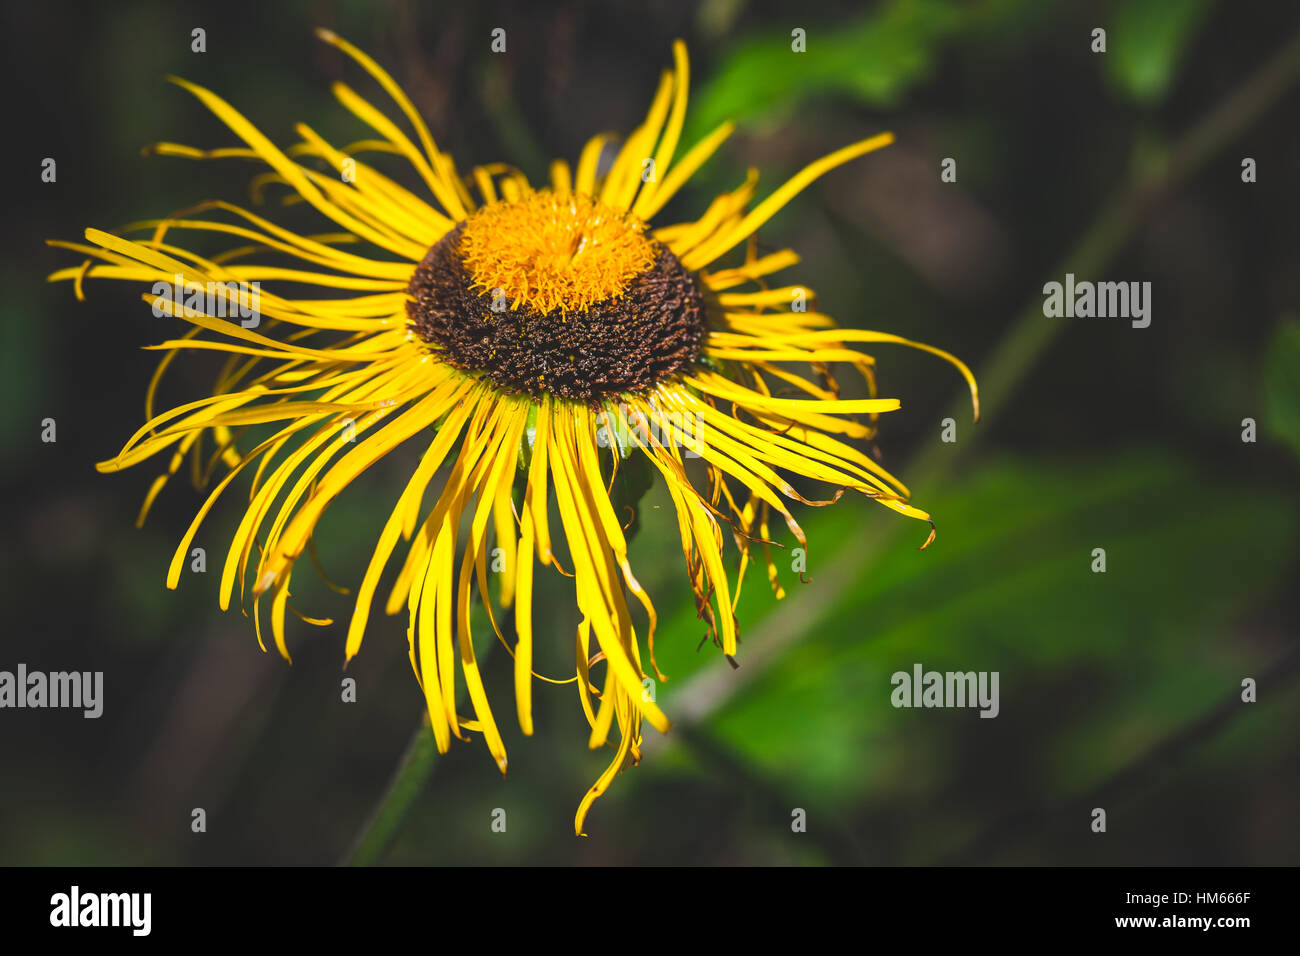 Inula flowering plants in the family Asteraceae, yellow decorative flower, macro photo with selective focus Stock Photo